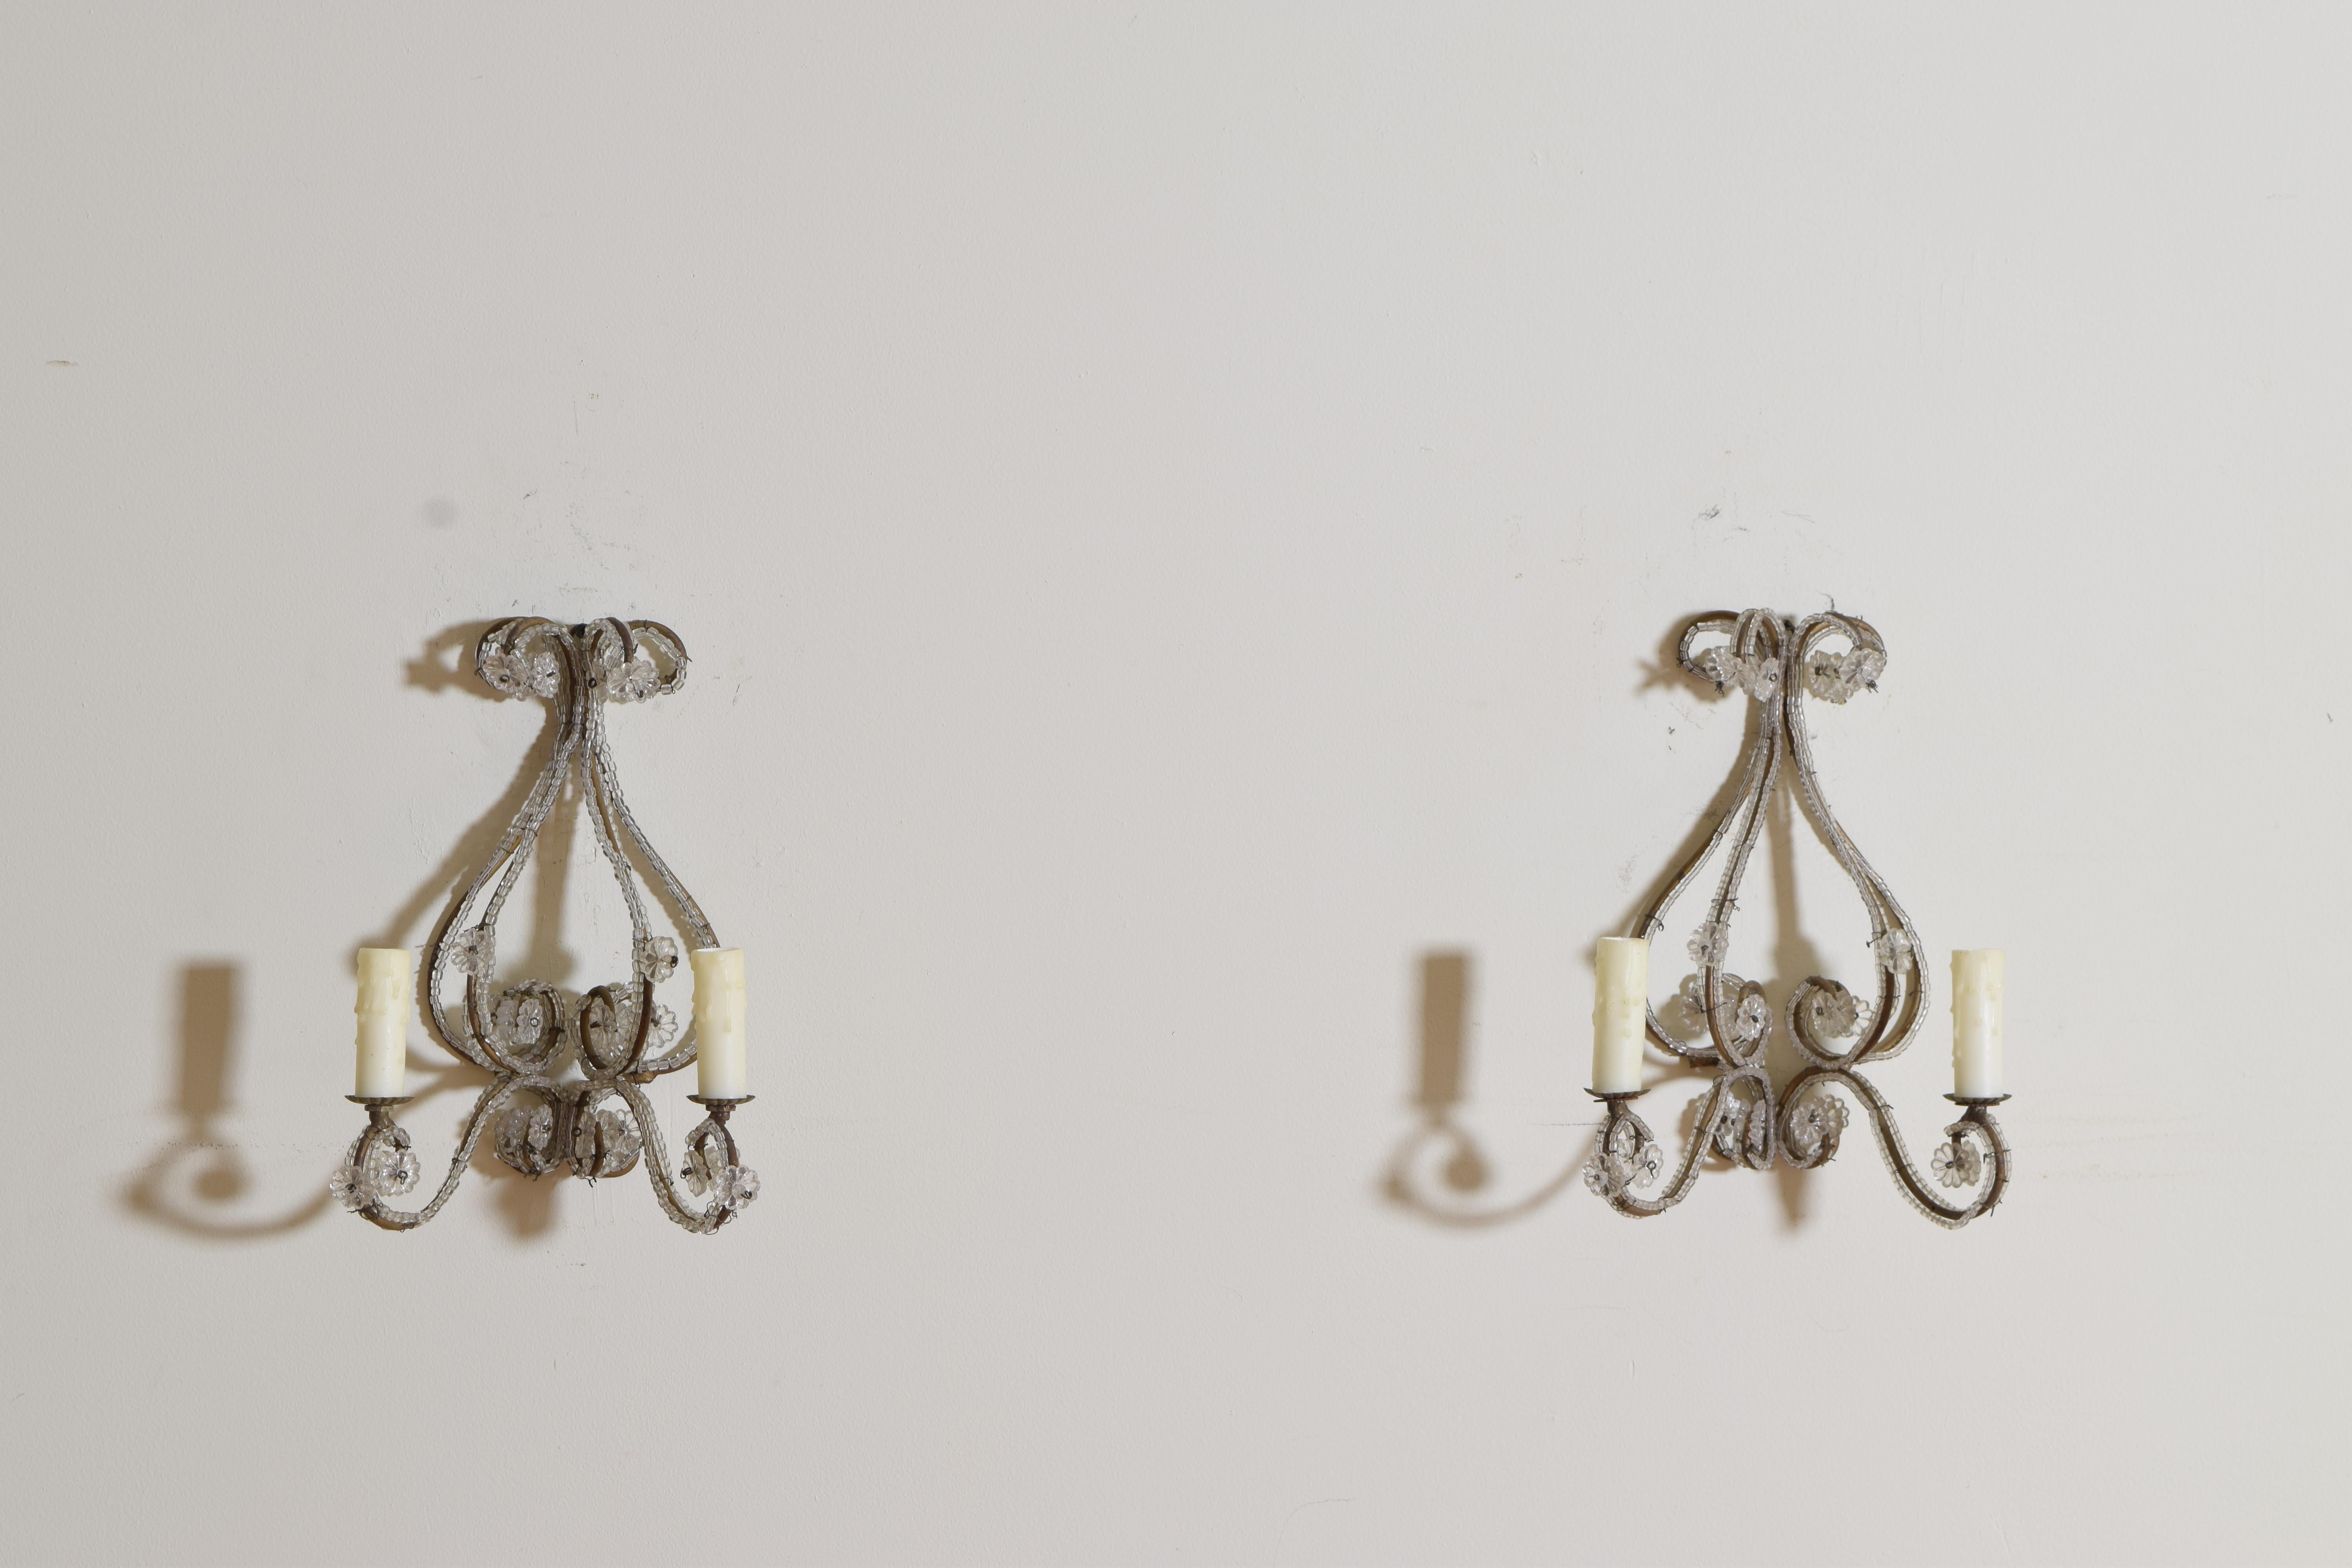 Each lyre shaped sconce constructed of scrolled gilded iron and wrapped in glass bead chain, the frames issuing two curved arms